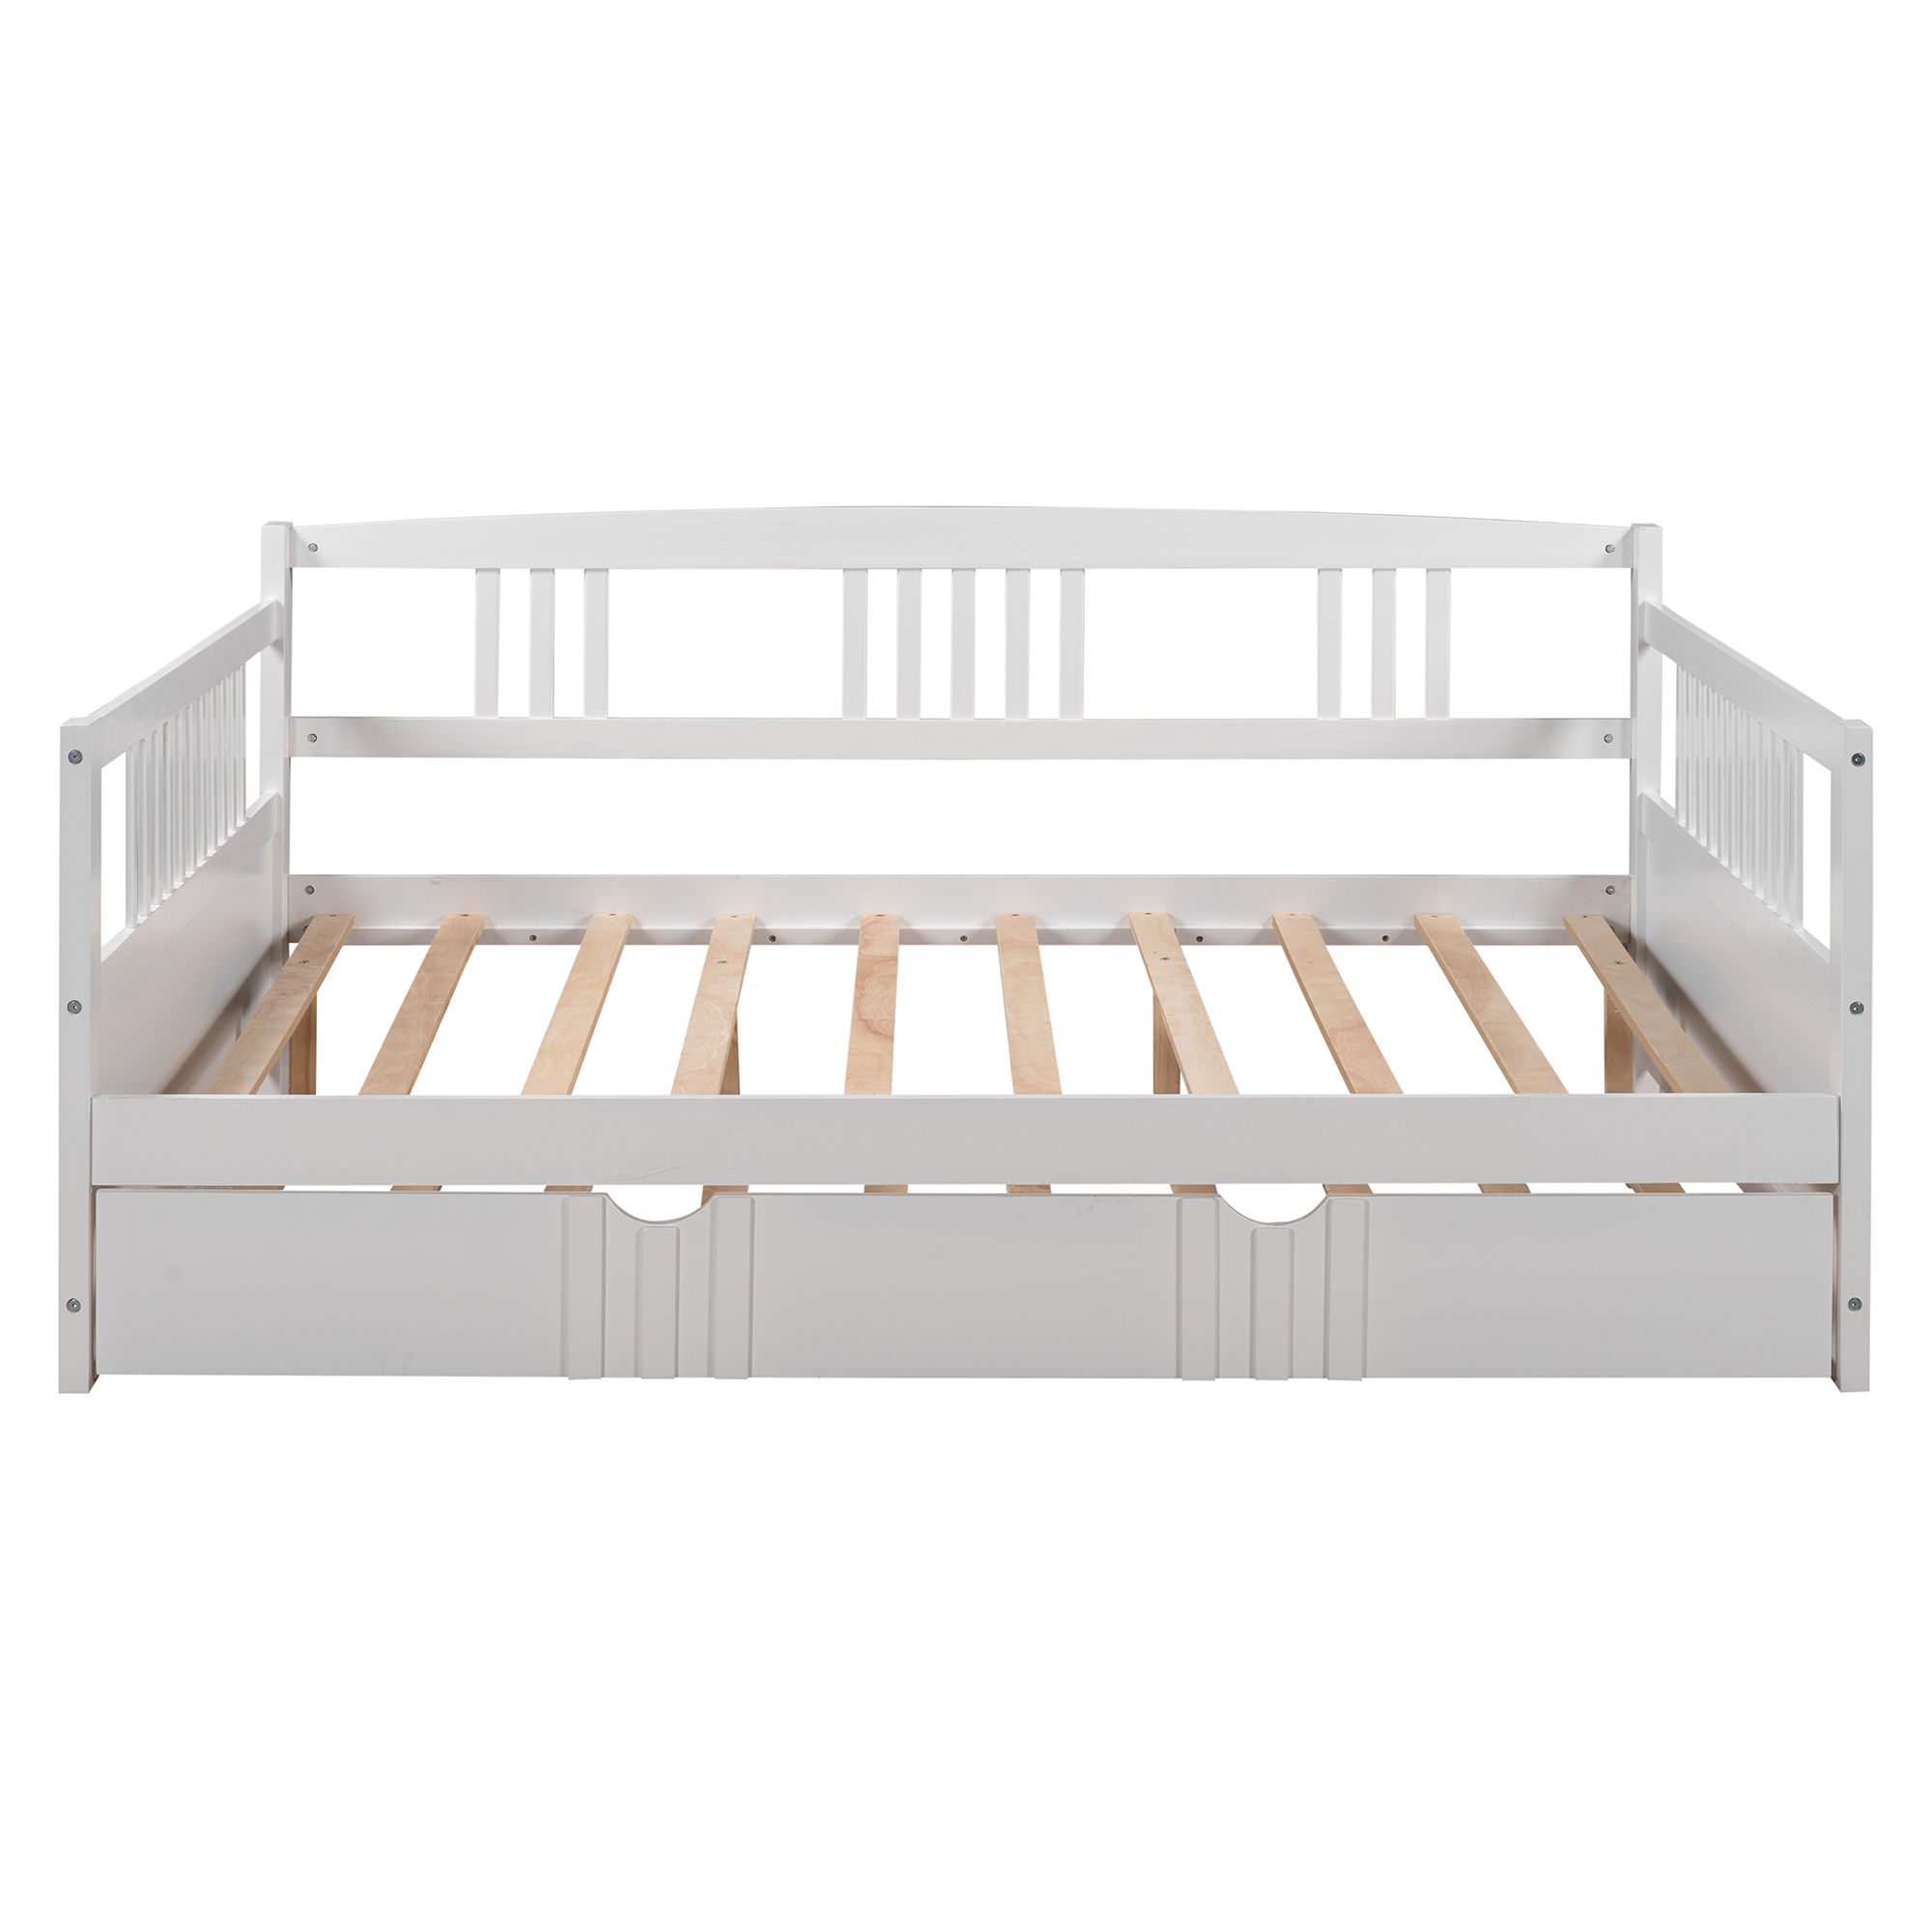 PAPROOS Daybed with Trundle Included, Full Size Daybed Bed Frame with Pull Out Trundle Bed and Wooden Slats, Solid Wood Sofa Bed Full Daybed, No Box Spring Needed, White - image 5 of 12